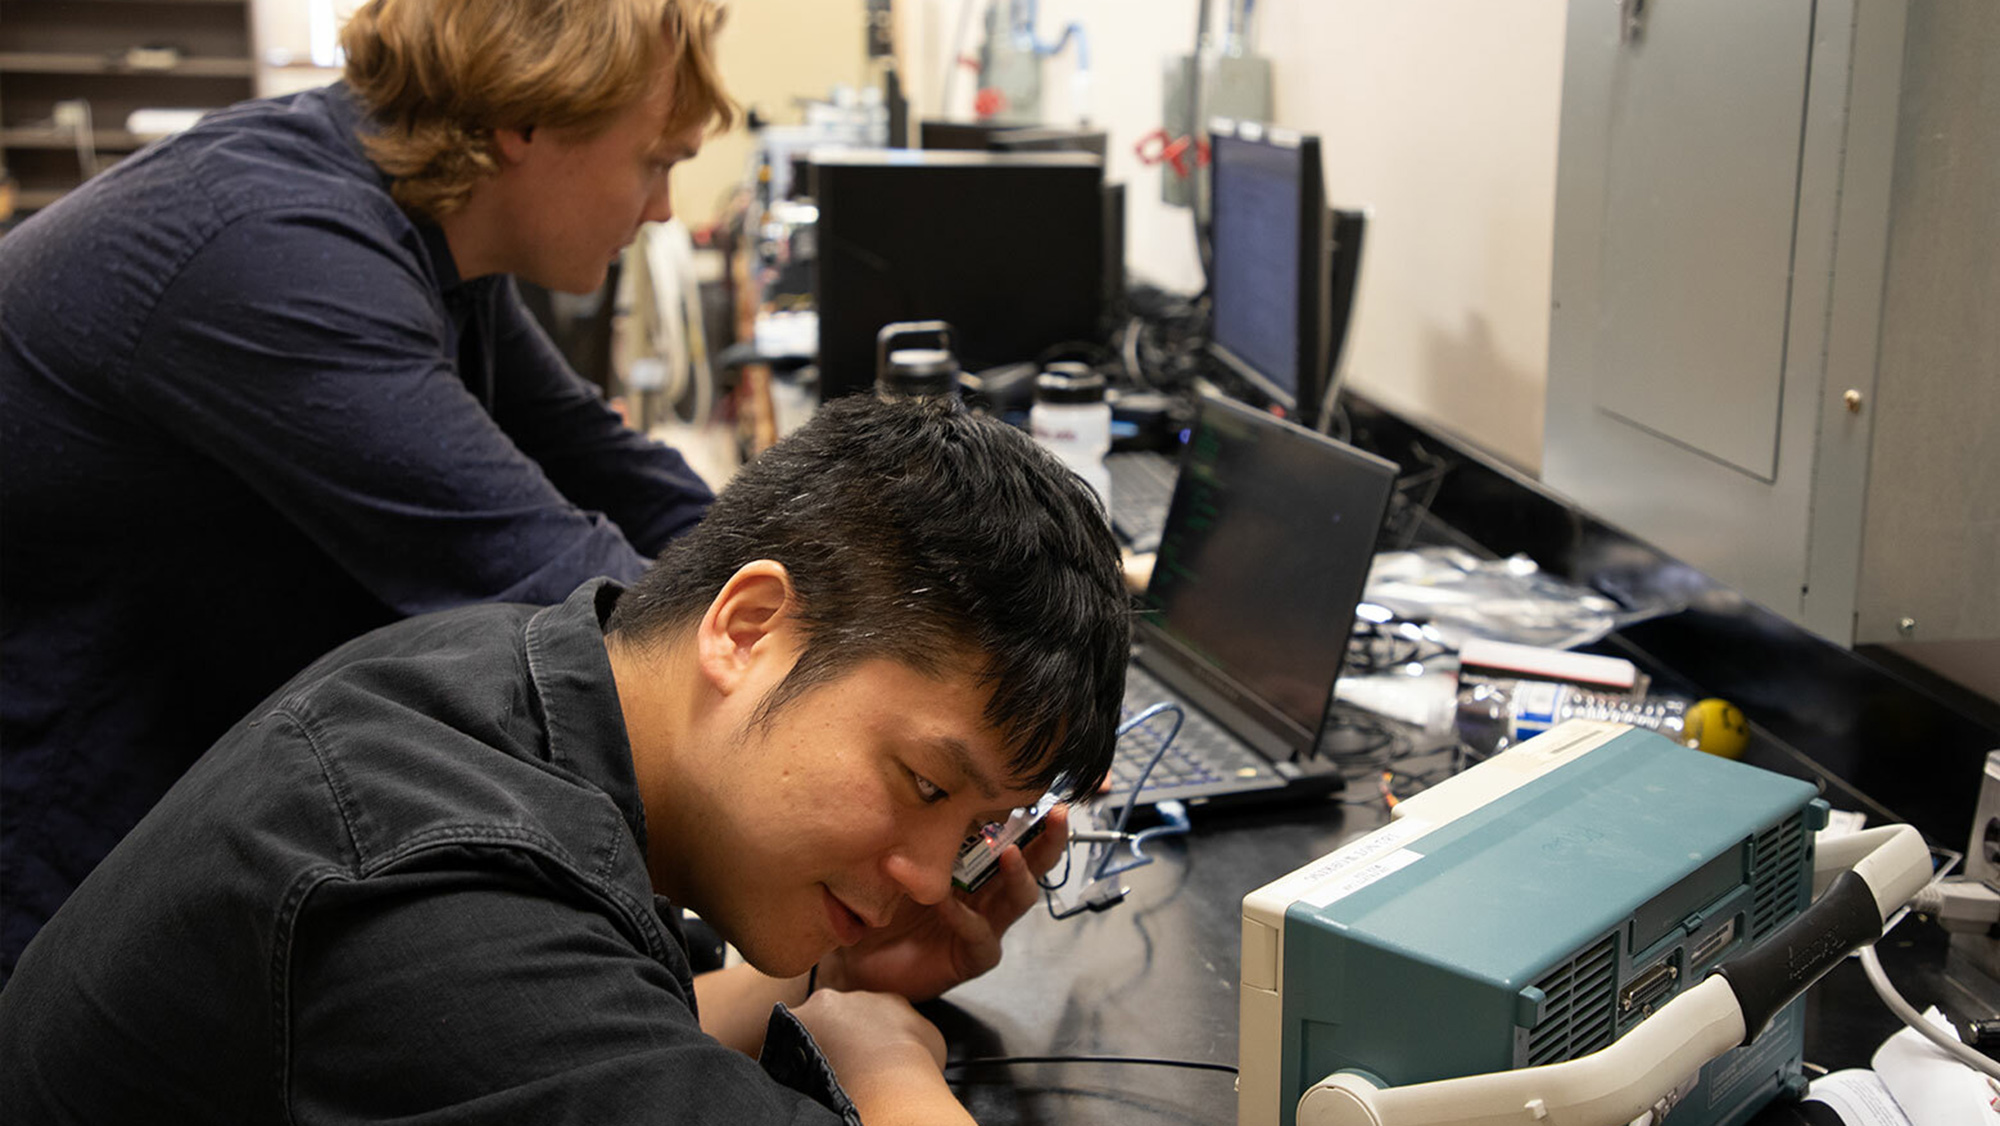 Peng-Hao Huang and Nicholas Heinrich-Barna working on hardware in a lab.